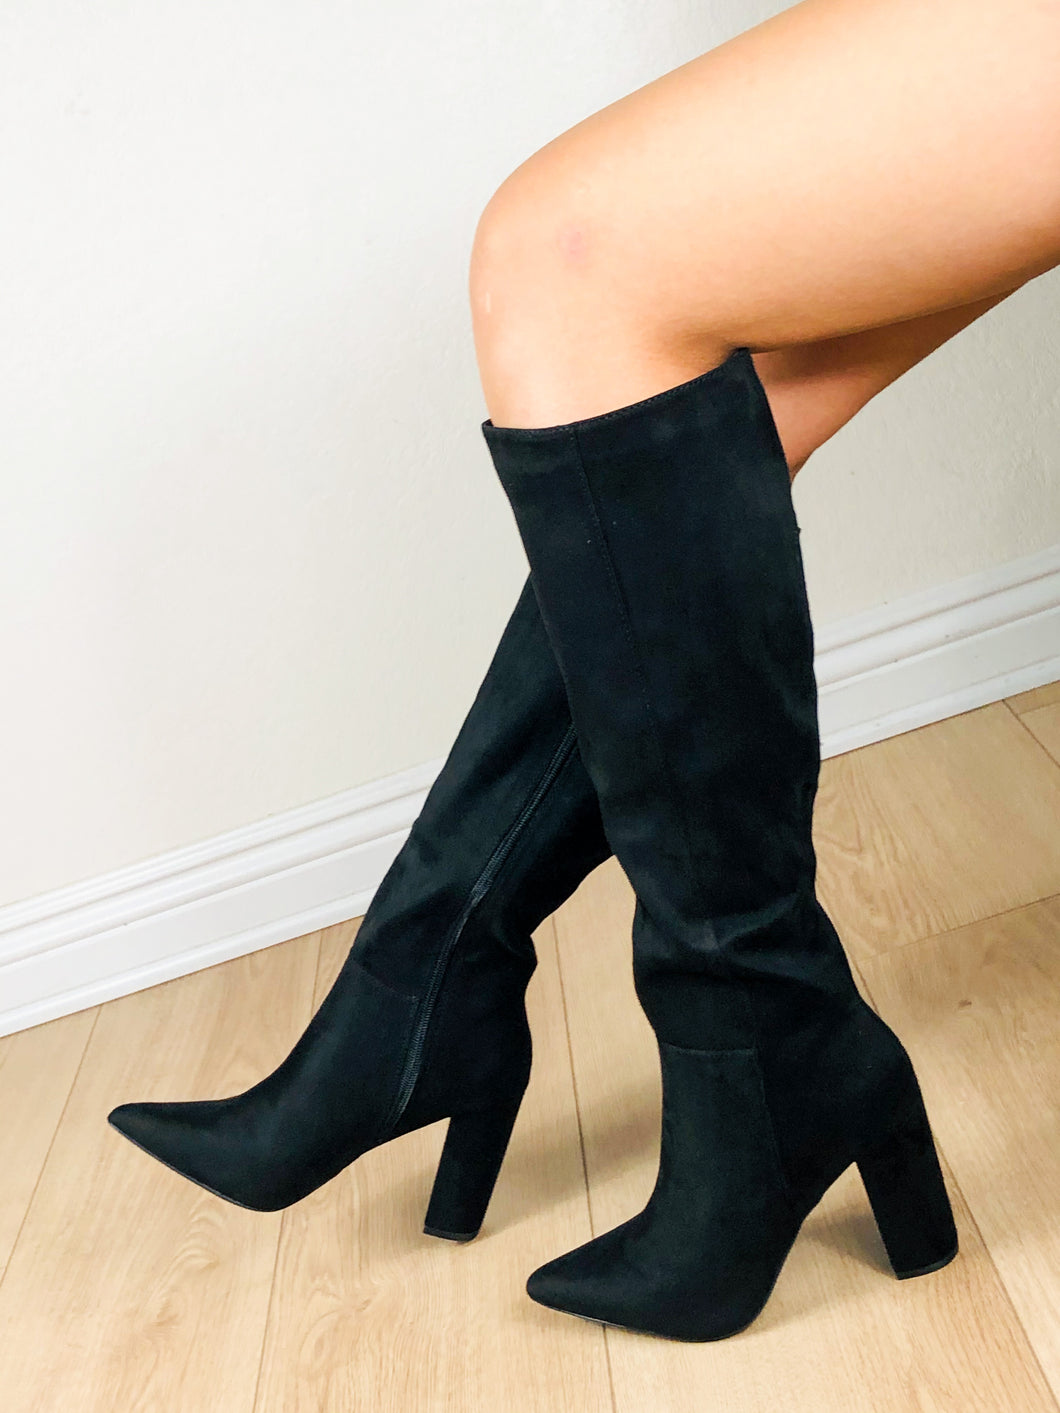 Black Boots - Suade material  Under the knee length  Inside is slightly padded  Pointed toe  Chunky heel